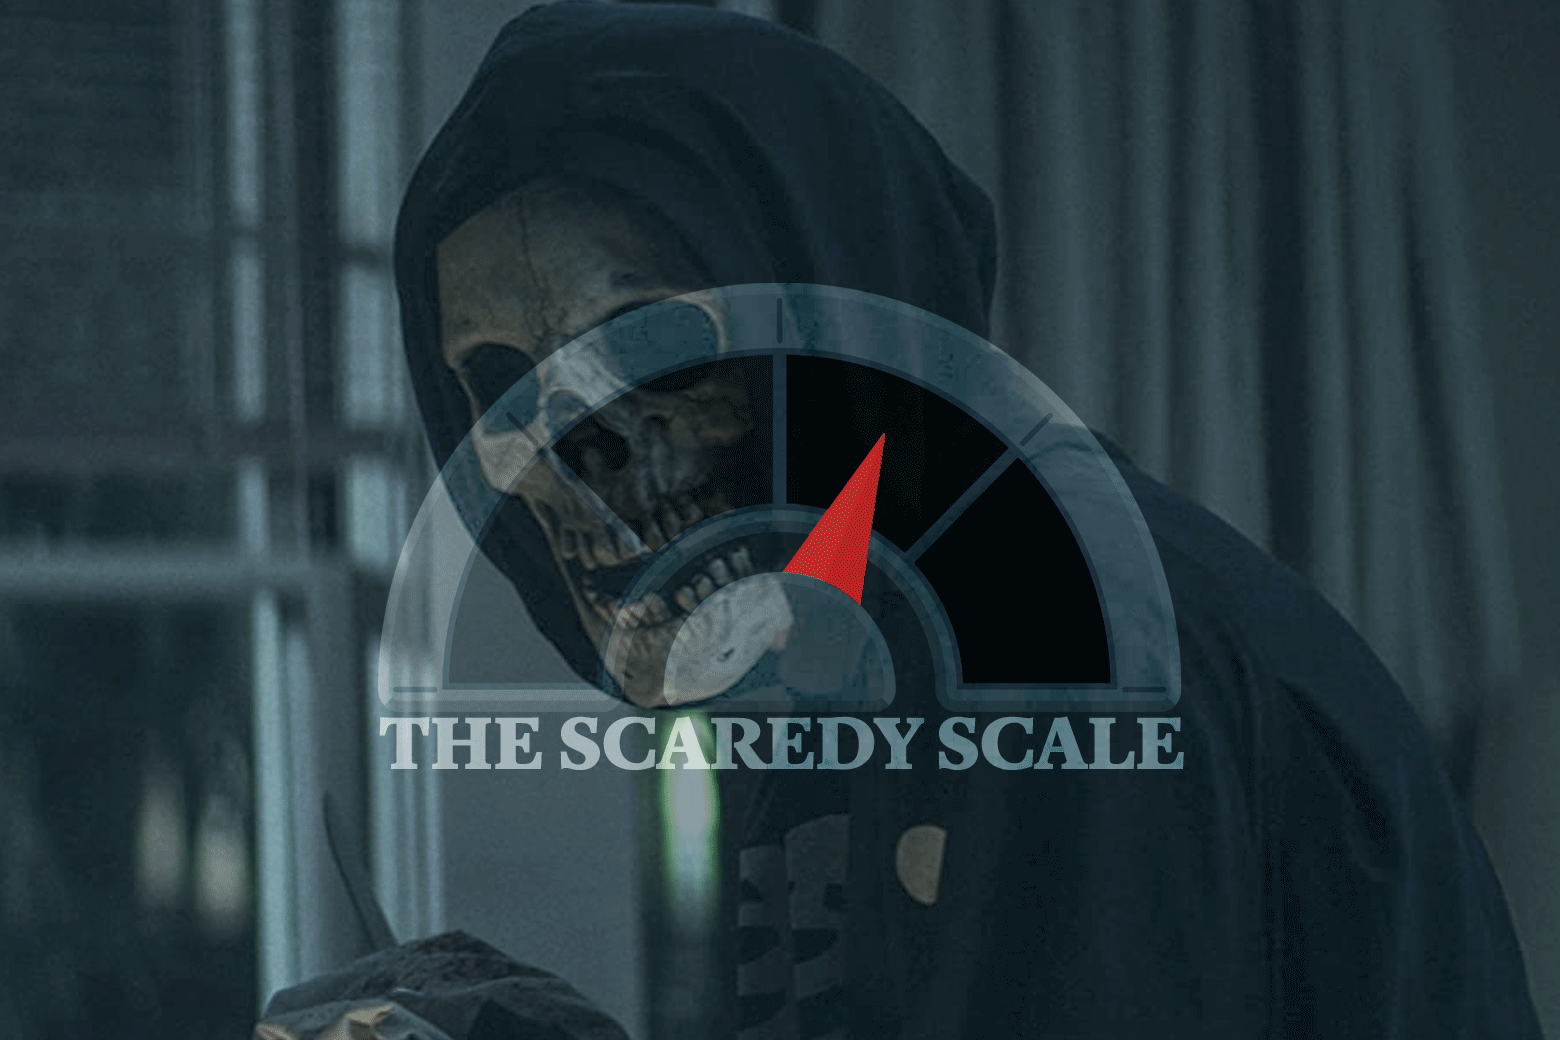 A figure in a skull mask, with a Scaredy Scale needle atop it.